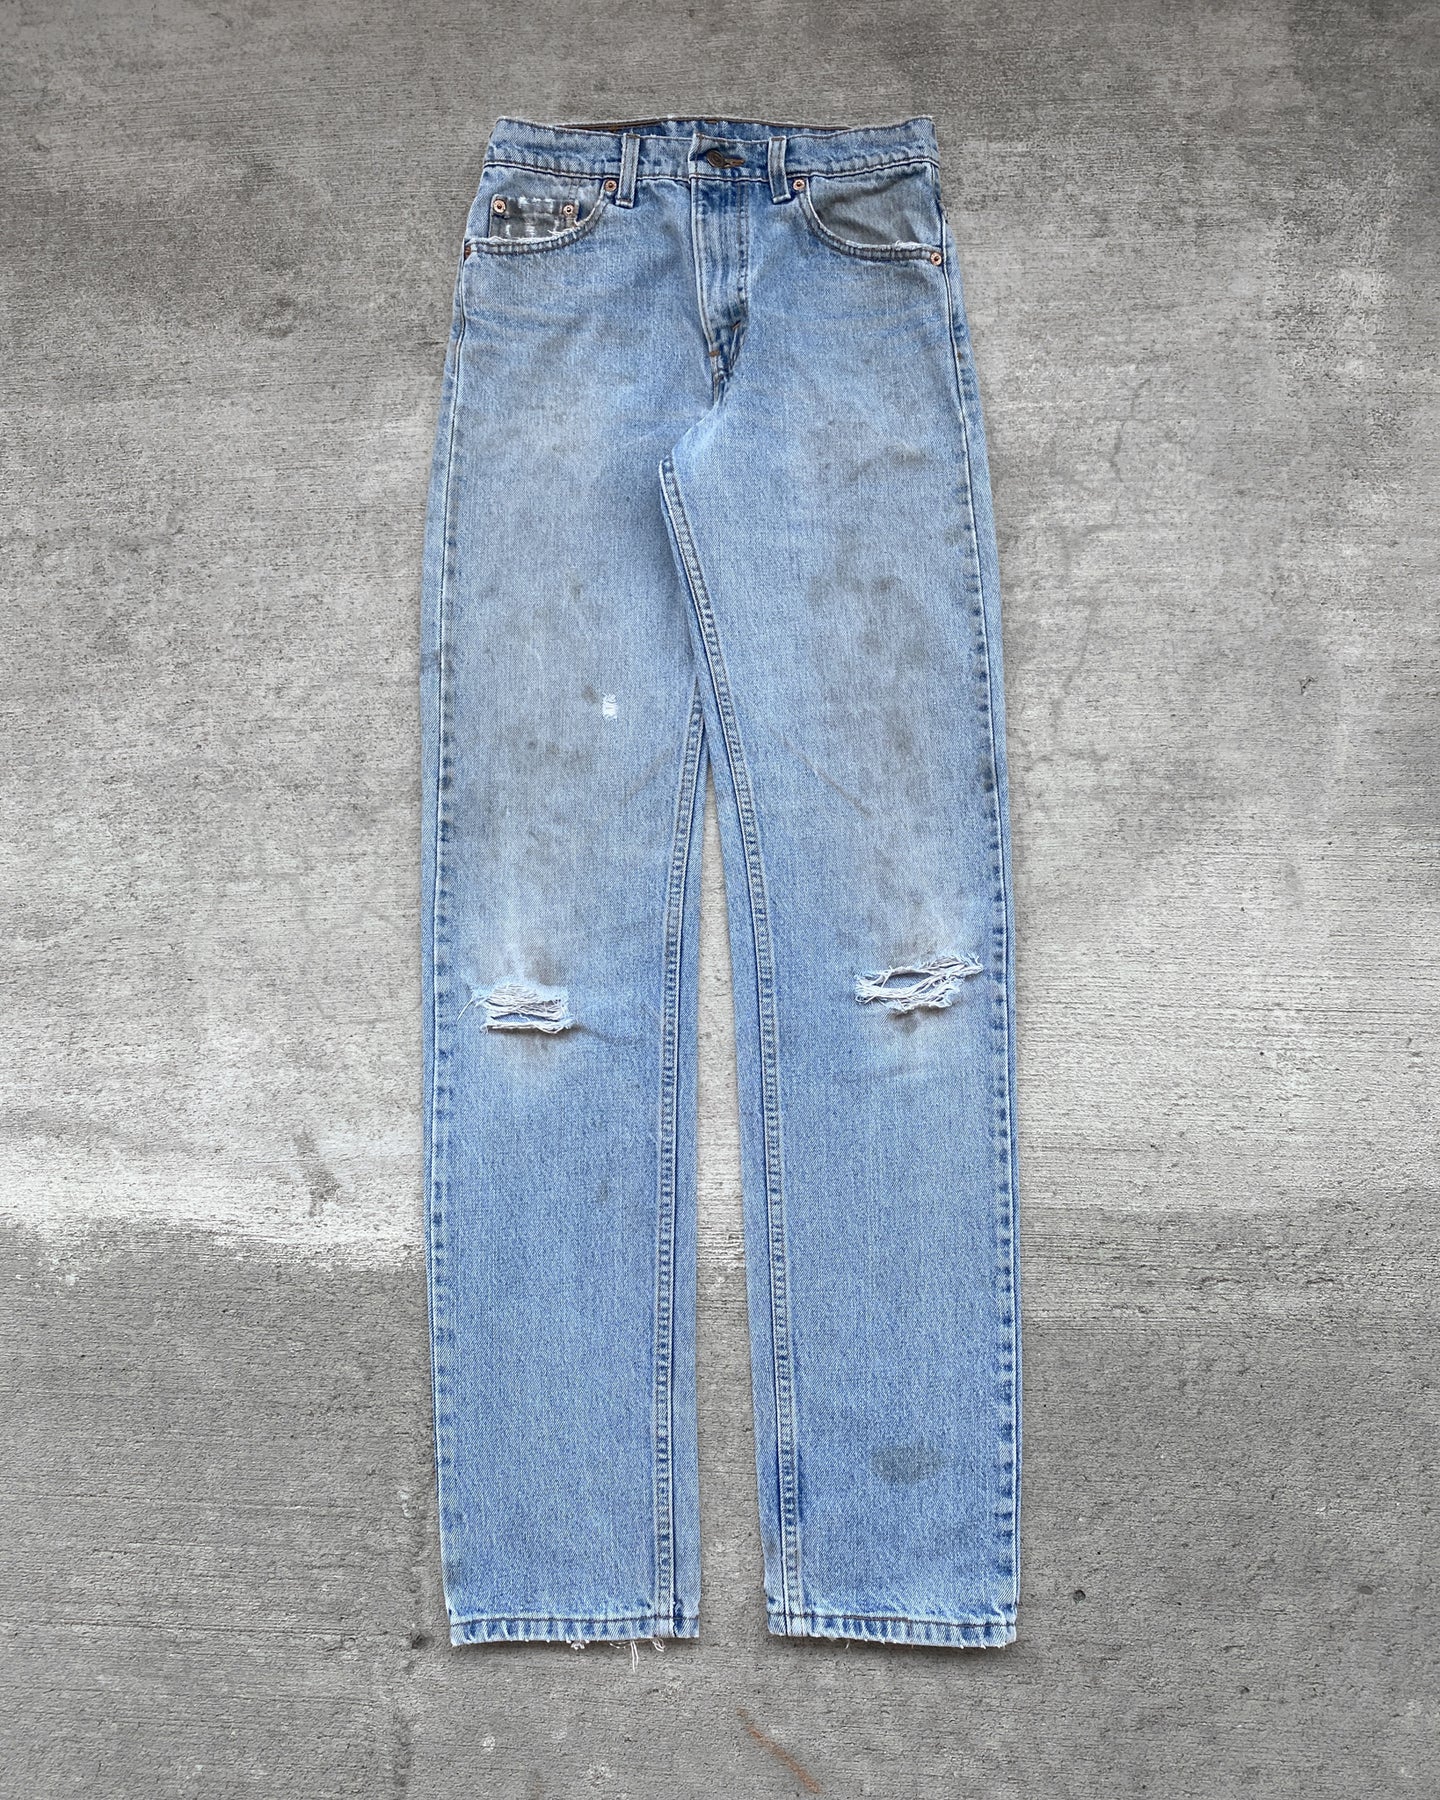 1990s Levi's Dirty and Distressed 505 - Size 29 x 35